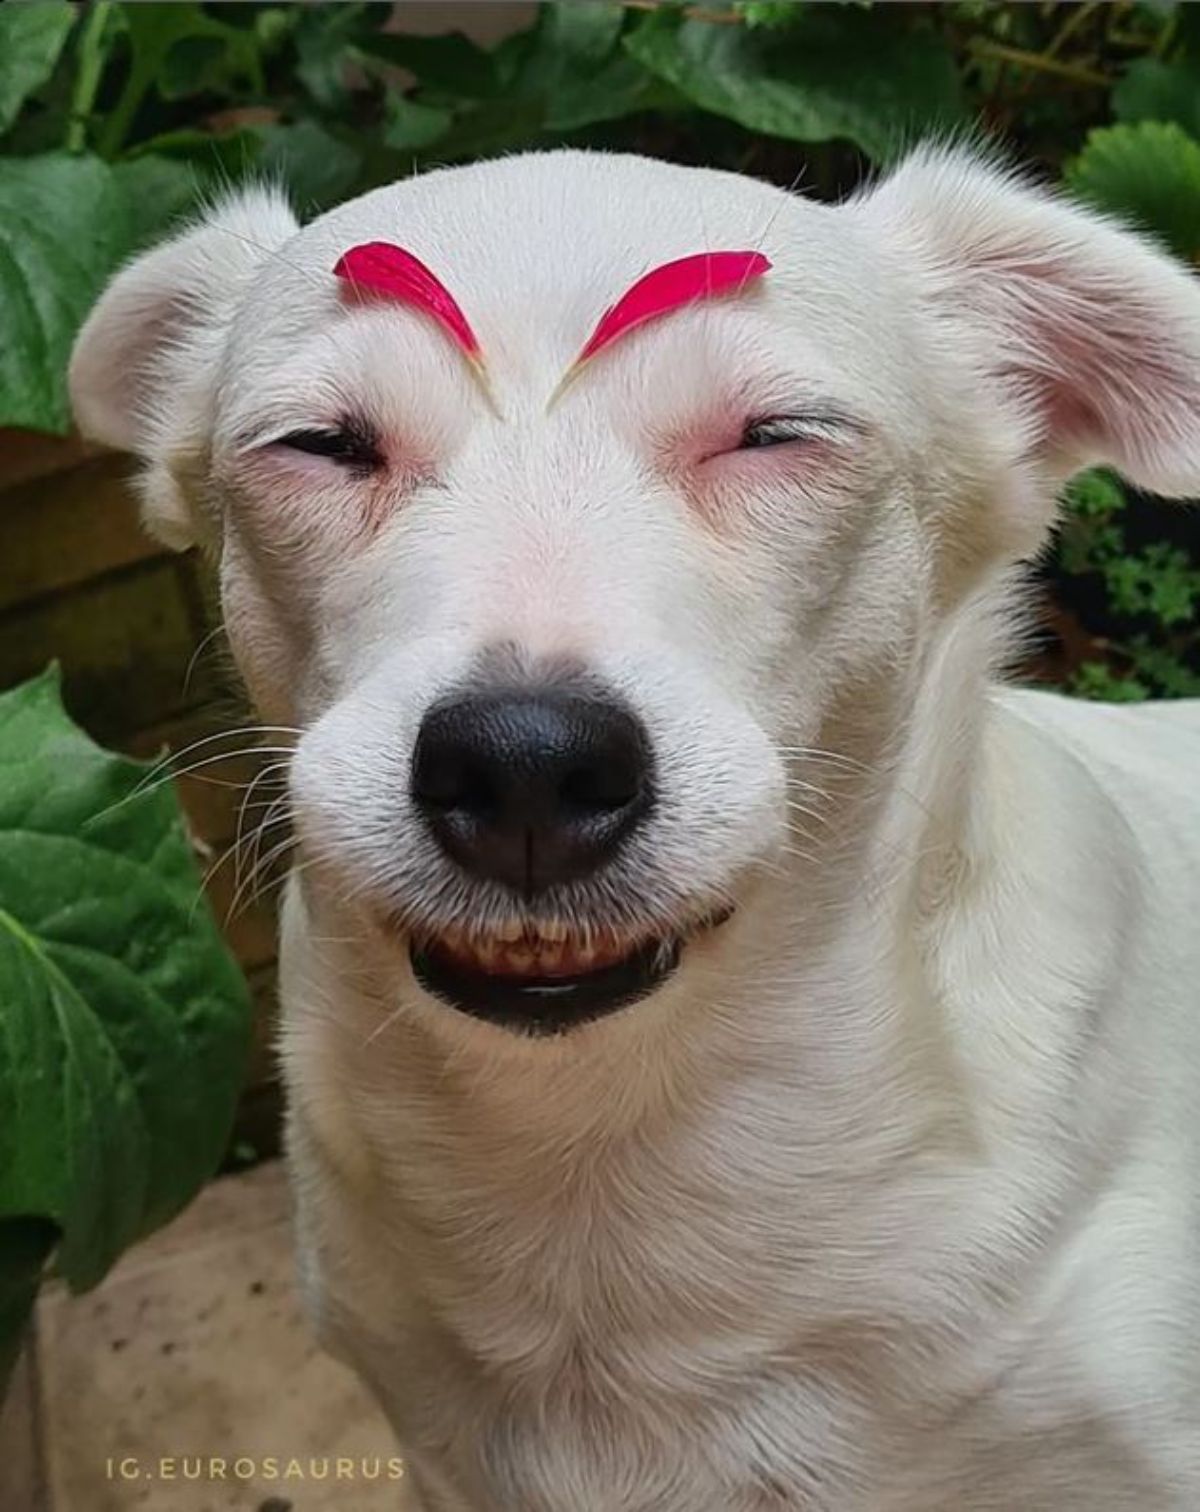 smiling white dog with red flower petals placed as eyebrows